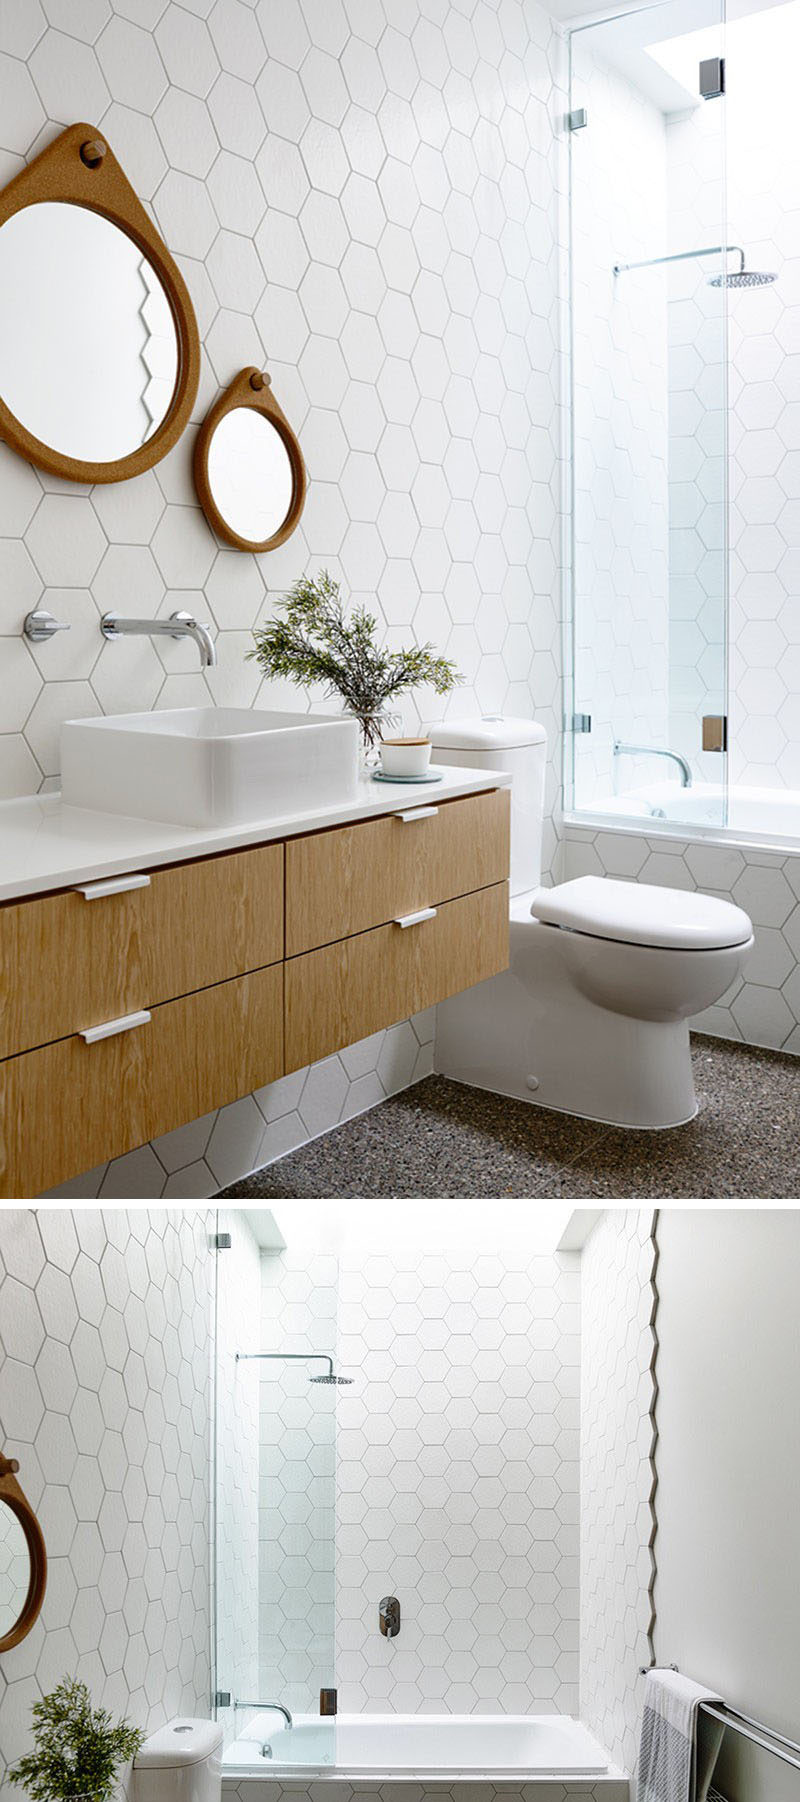 19 Ideas For Using Hexagons In Interior Design And Architecture // The bathroom in this house features floor to ceiling white hexagonal tiles on the walls.